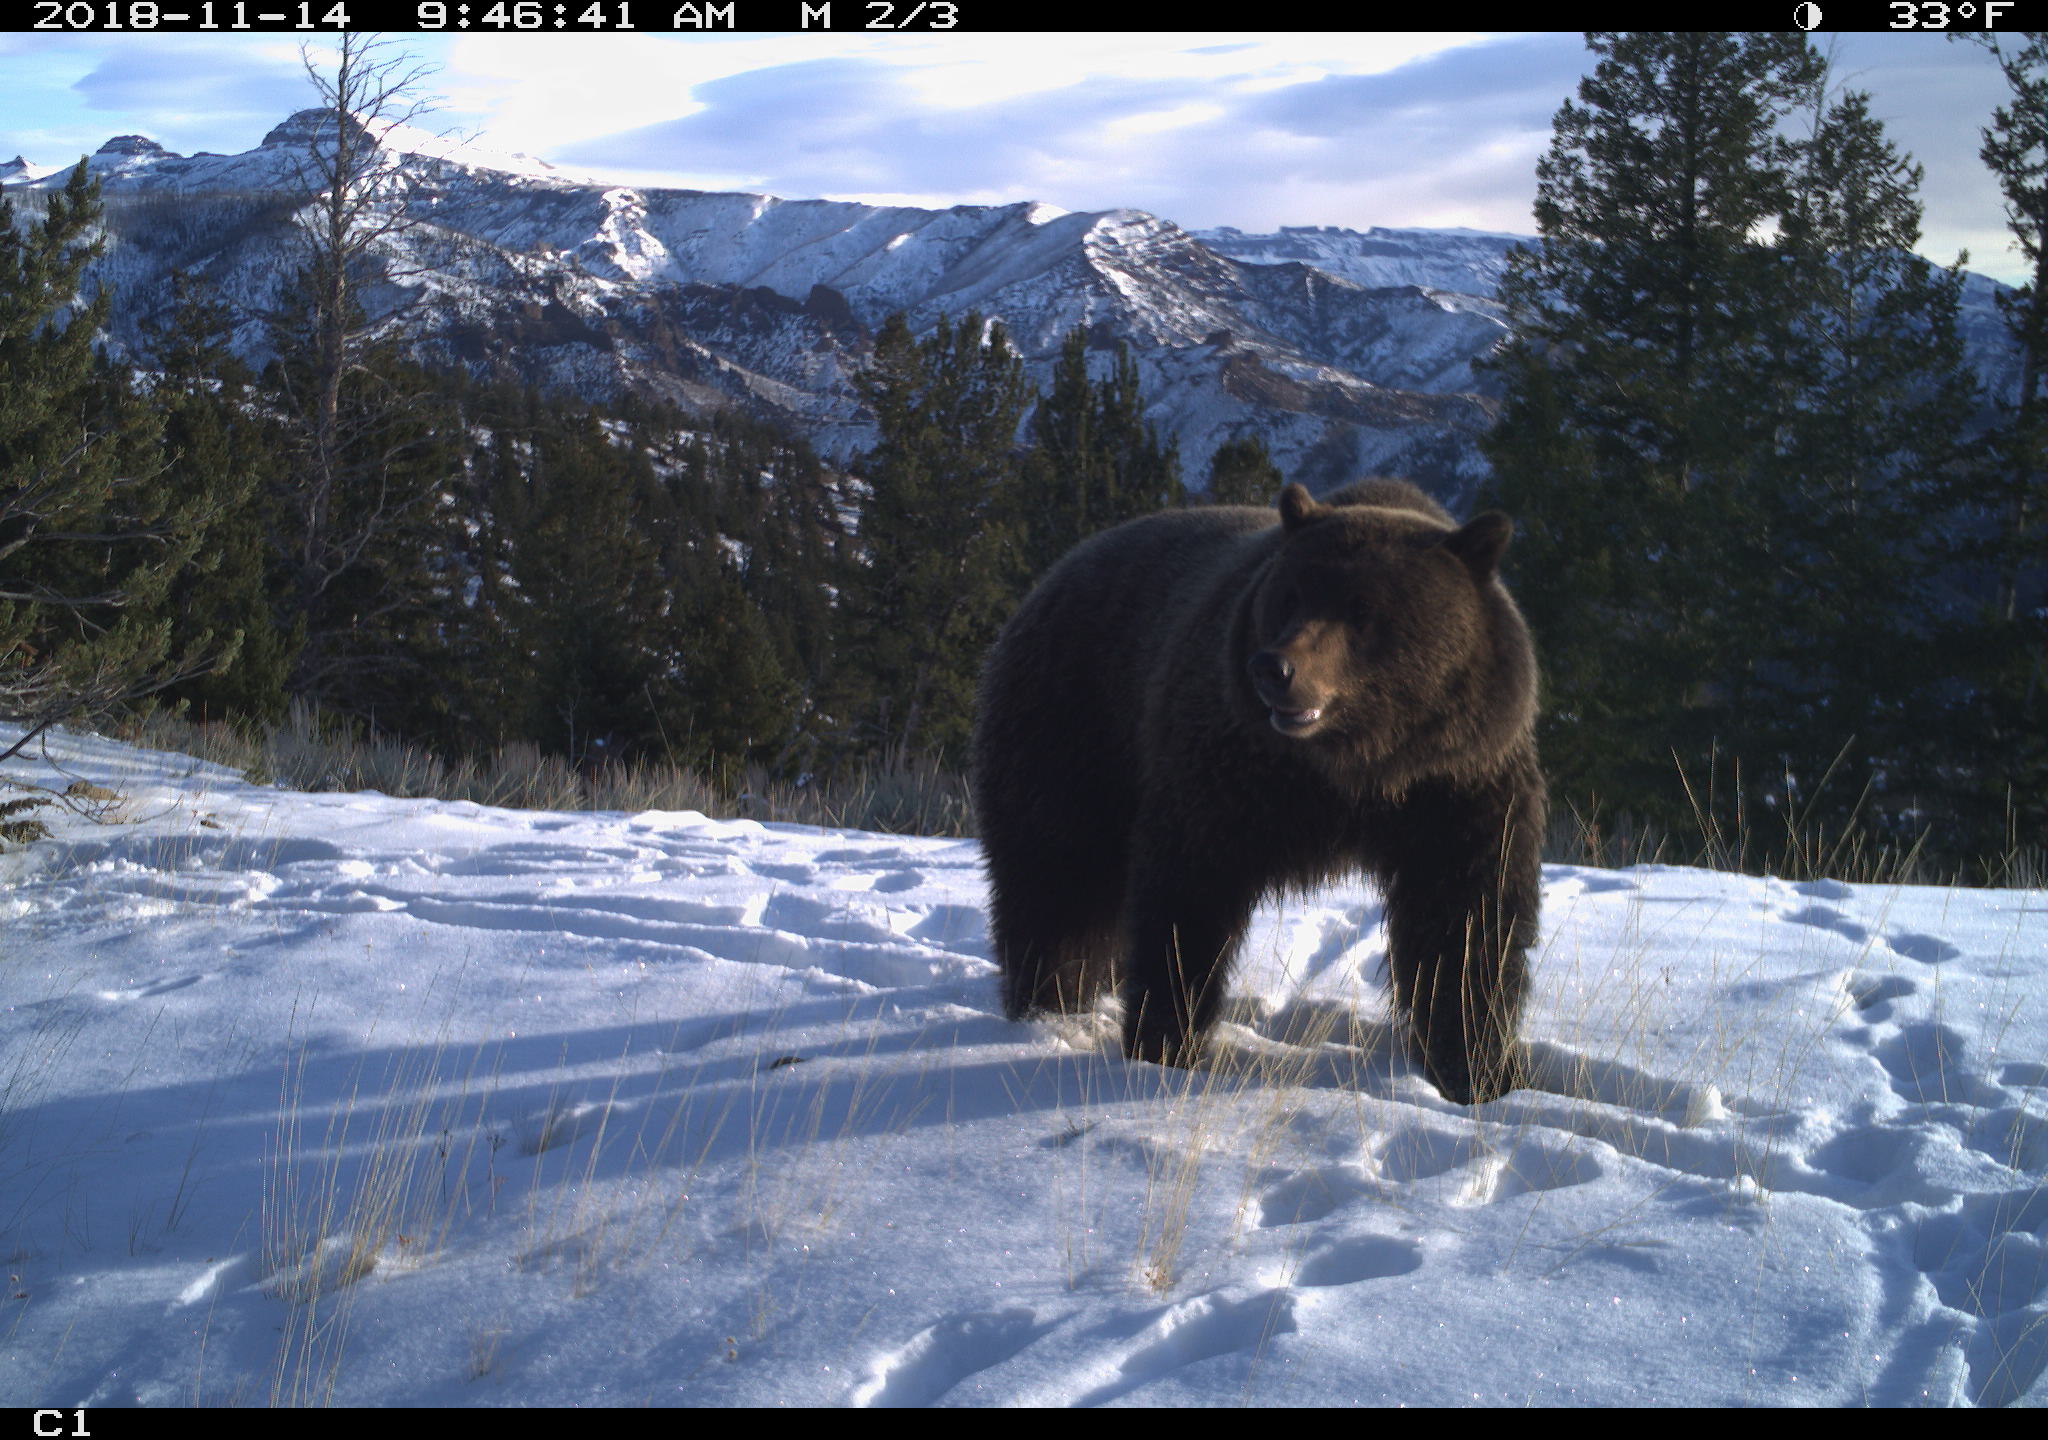 Trail camera images help Game and Fish monitor wildlife